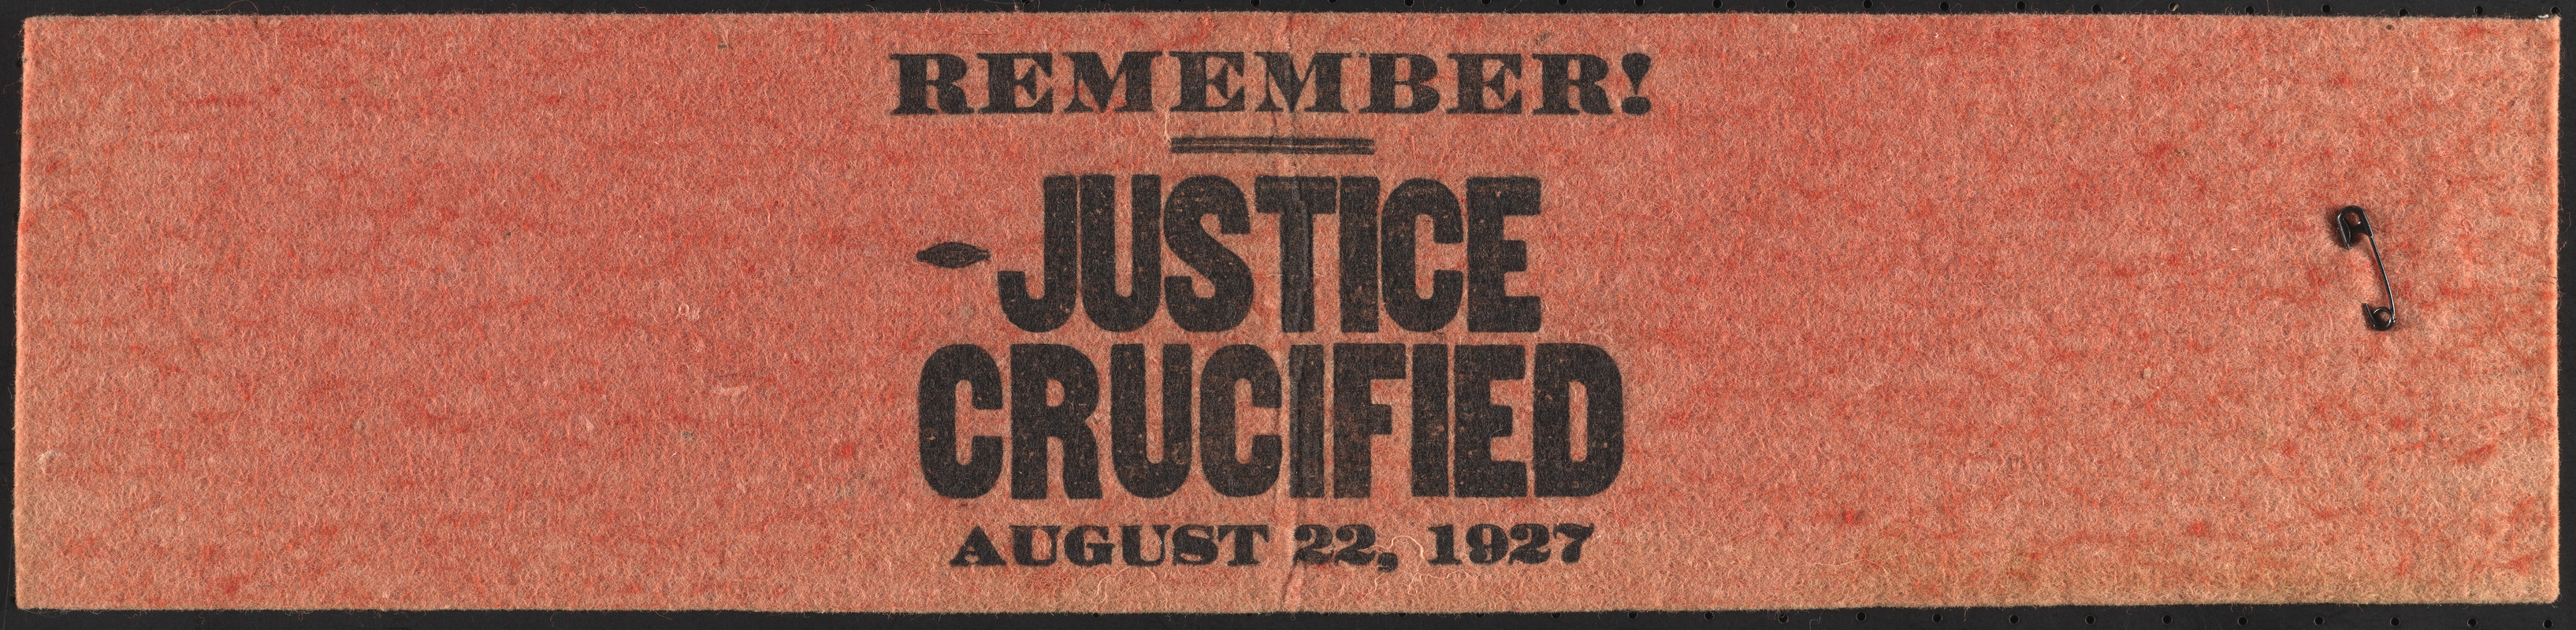 Remember! Justice crucified August 22, 1927